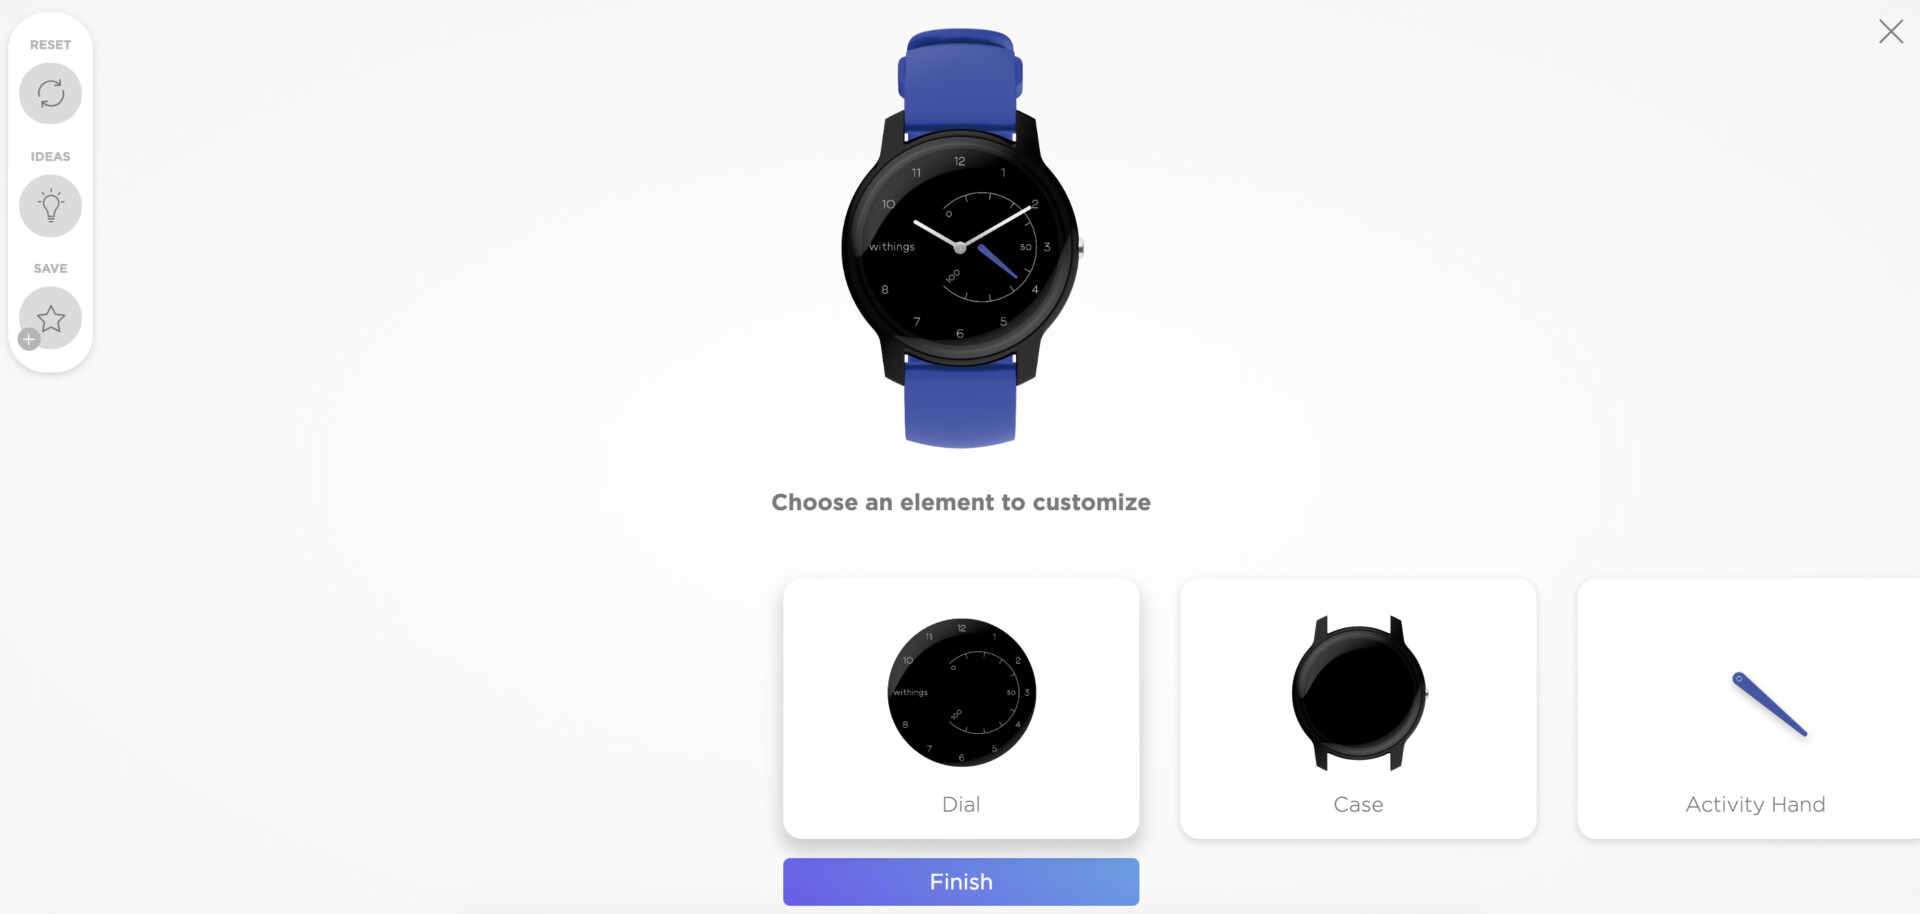 Customization options fot hte Withings Move